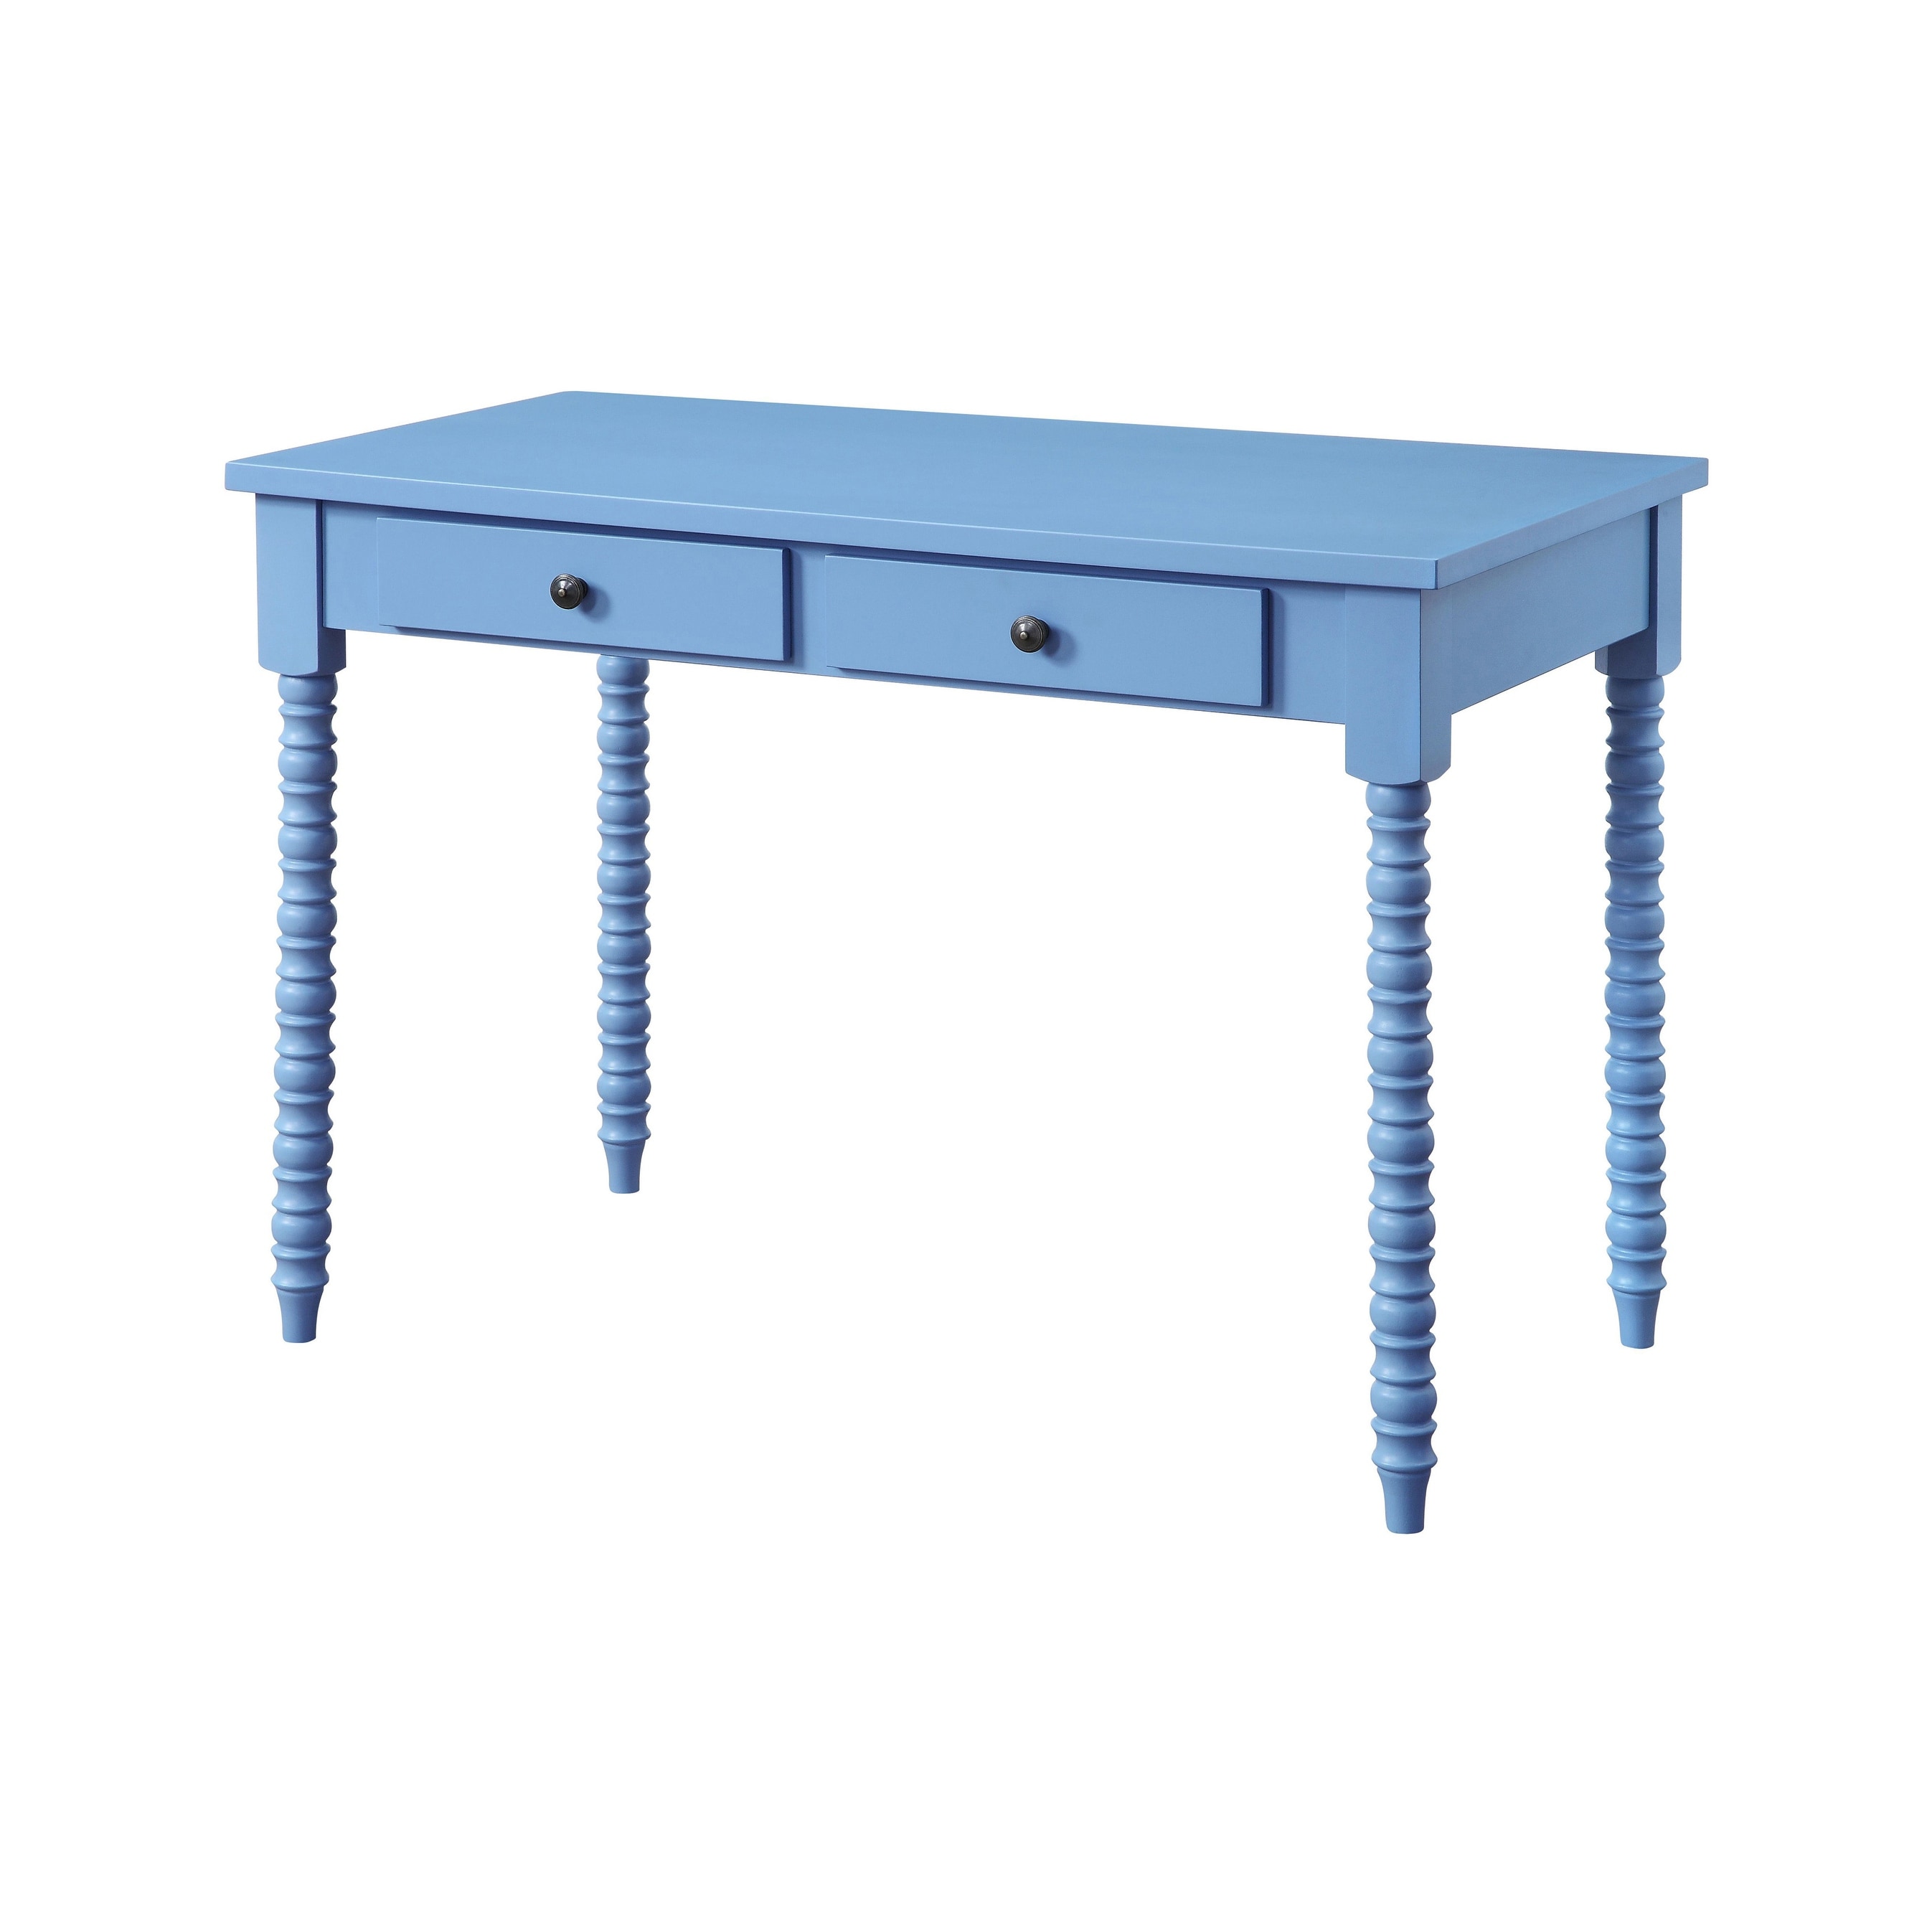 ACME Altmar Writing Desk in Blue - image 1 of 5